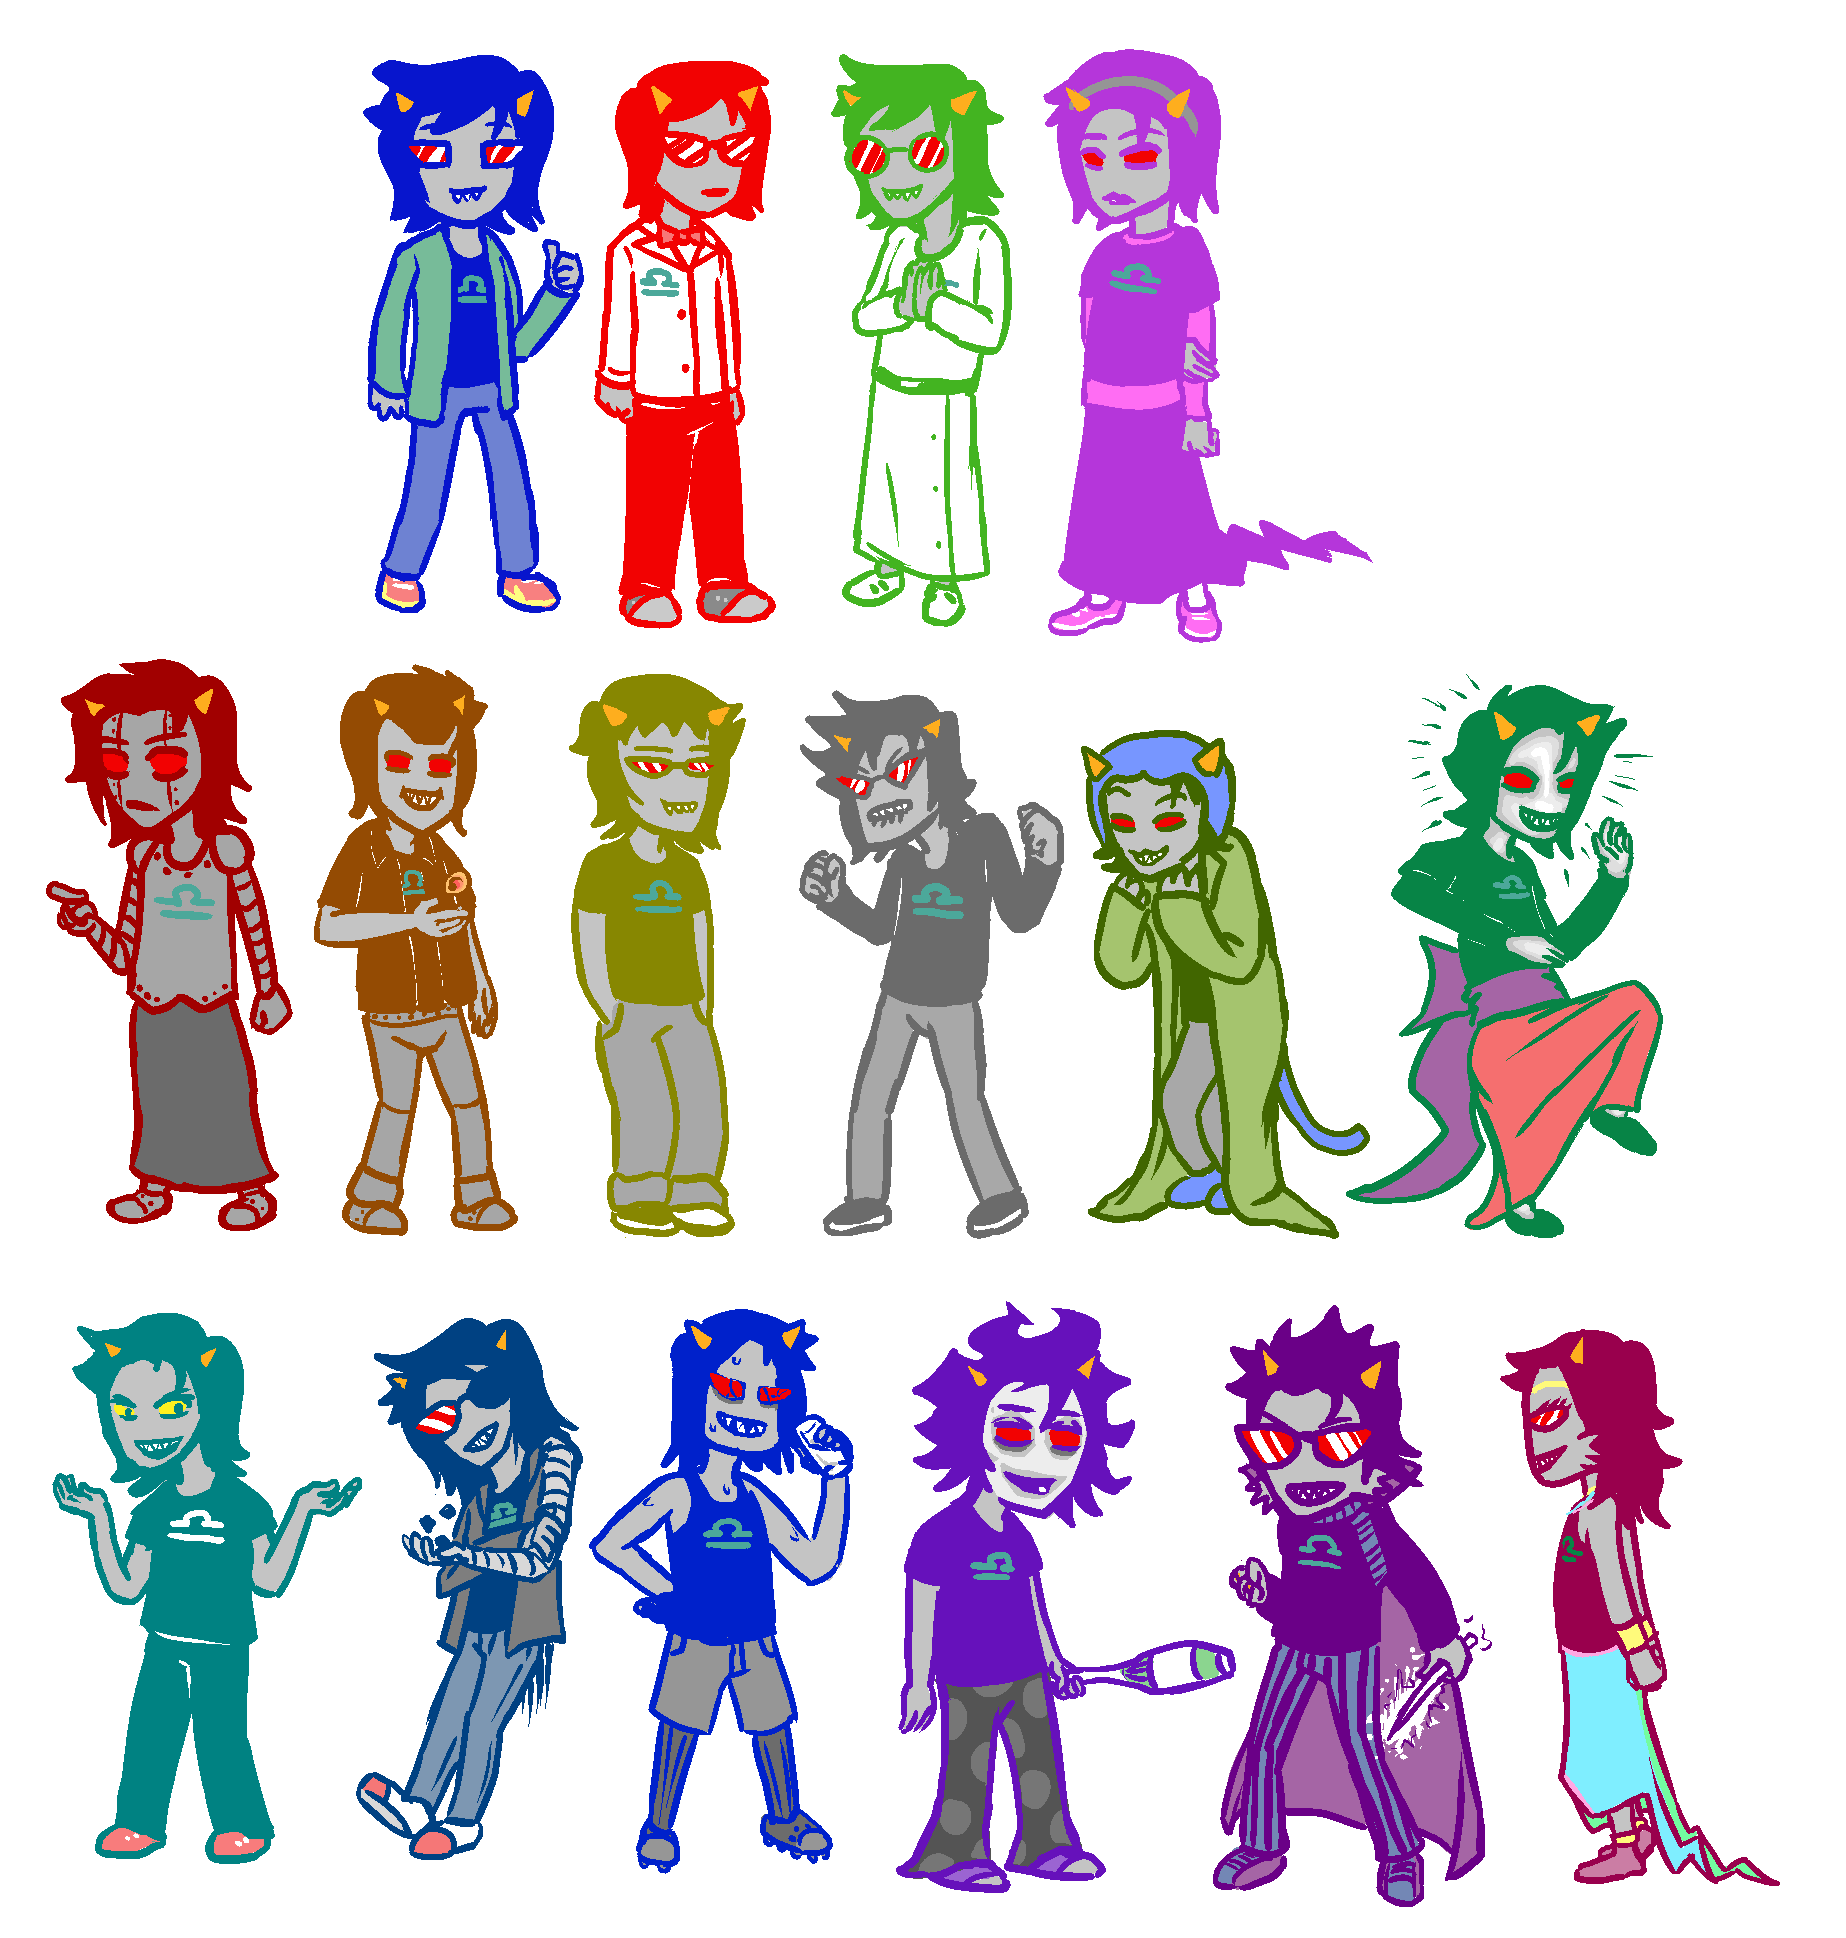 artificial_limb black_squiddle_dress cat_hat clothingswap cosplay deleted_source deuce_clubs empiricist's_wand fluorite_octet glassesswap huge john's_vriska_outfit marina-stalker multiple_personas no_glasses puppet_tux rainbow_drinker robot seeing_terezi solo starter_outfit terezi_pyrope thumbs_up